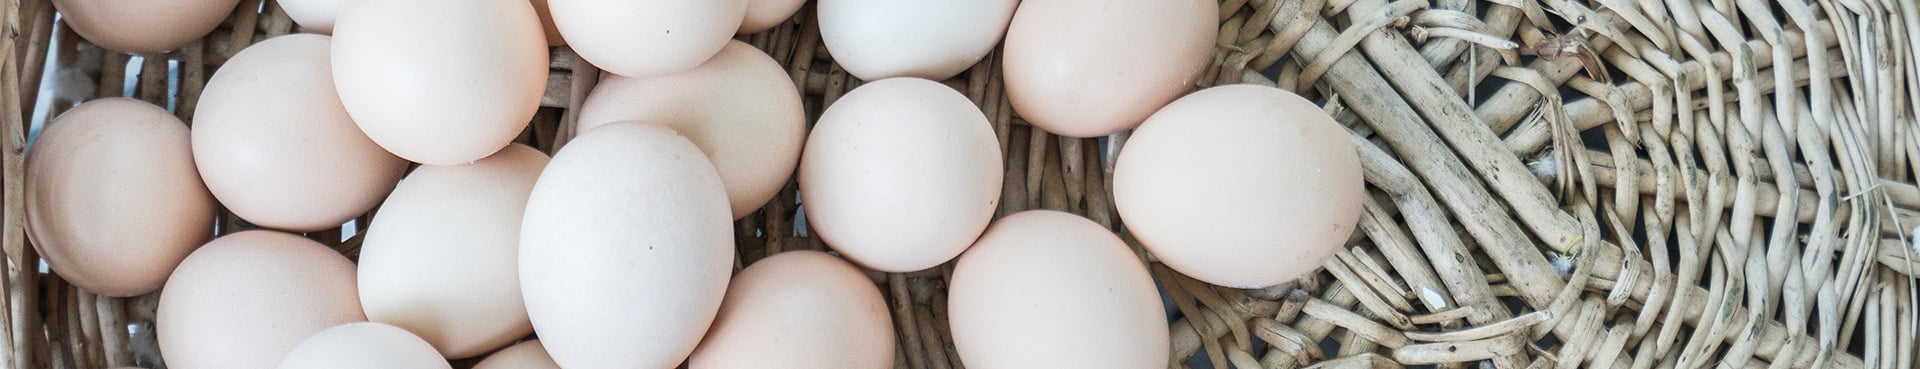 Cropped image of eggs in a wicker basket